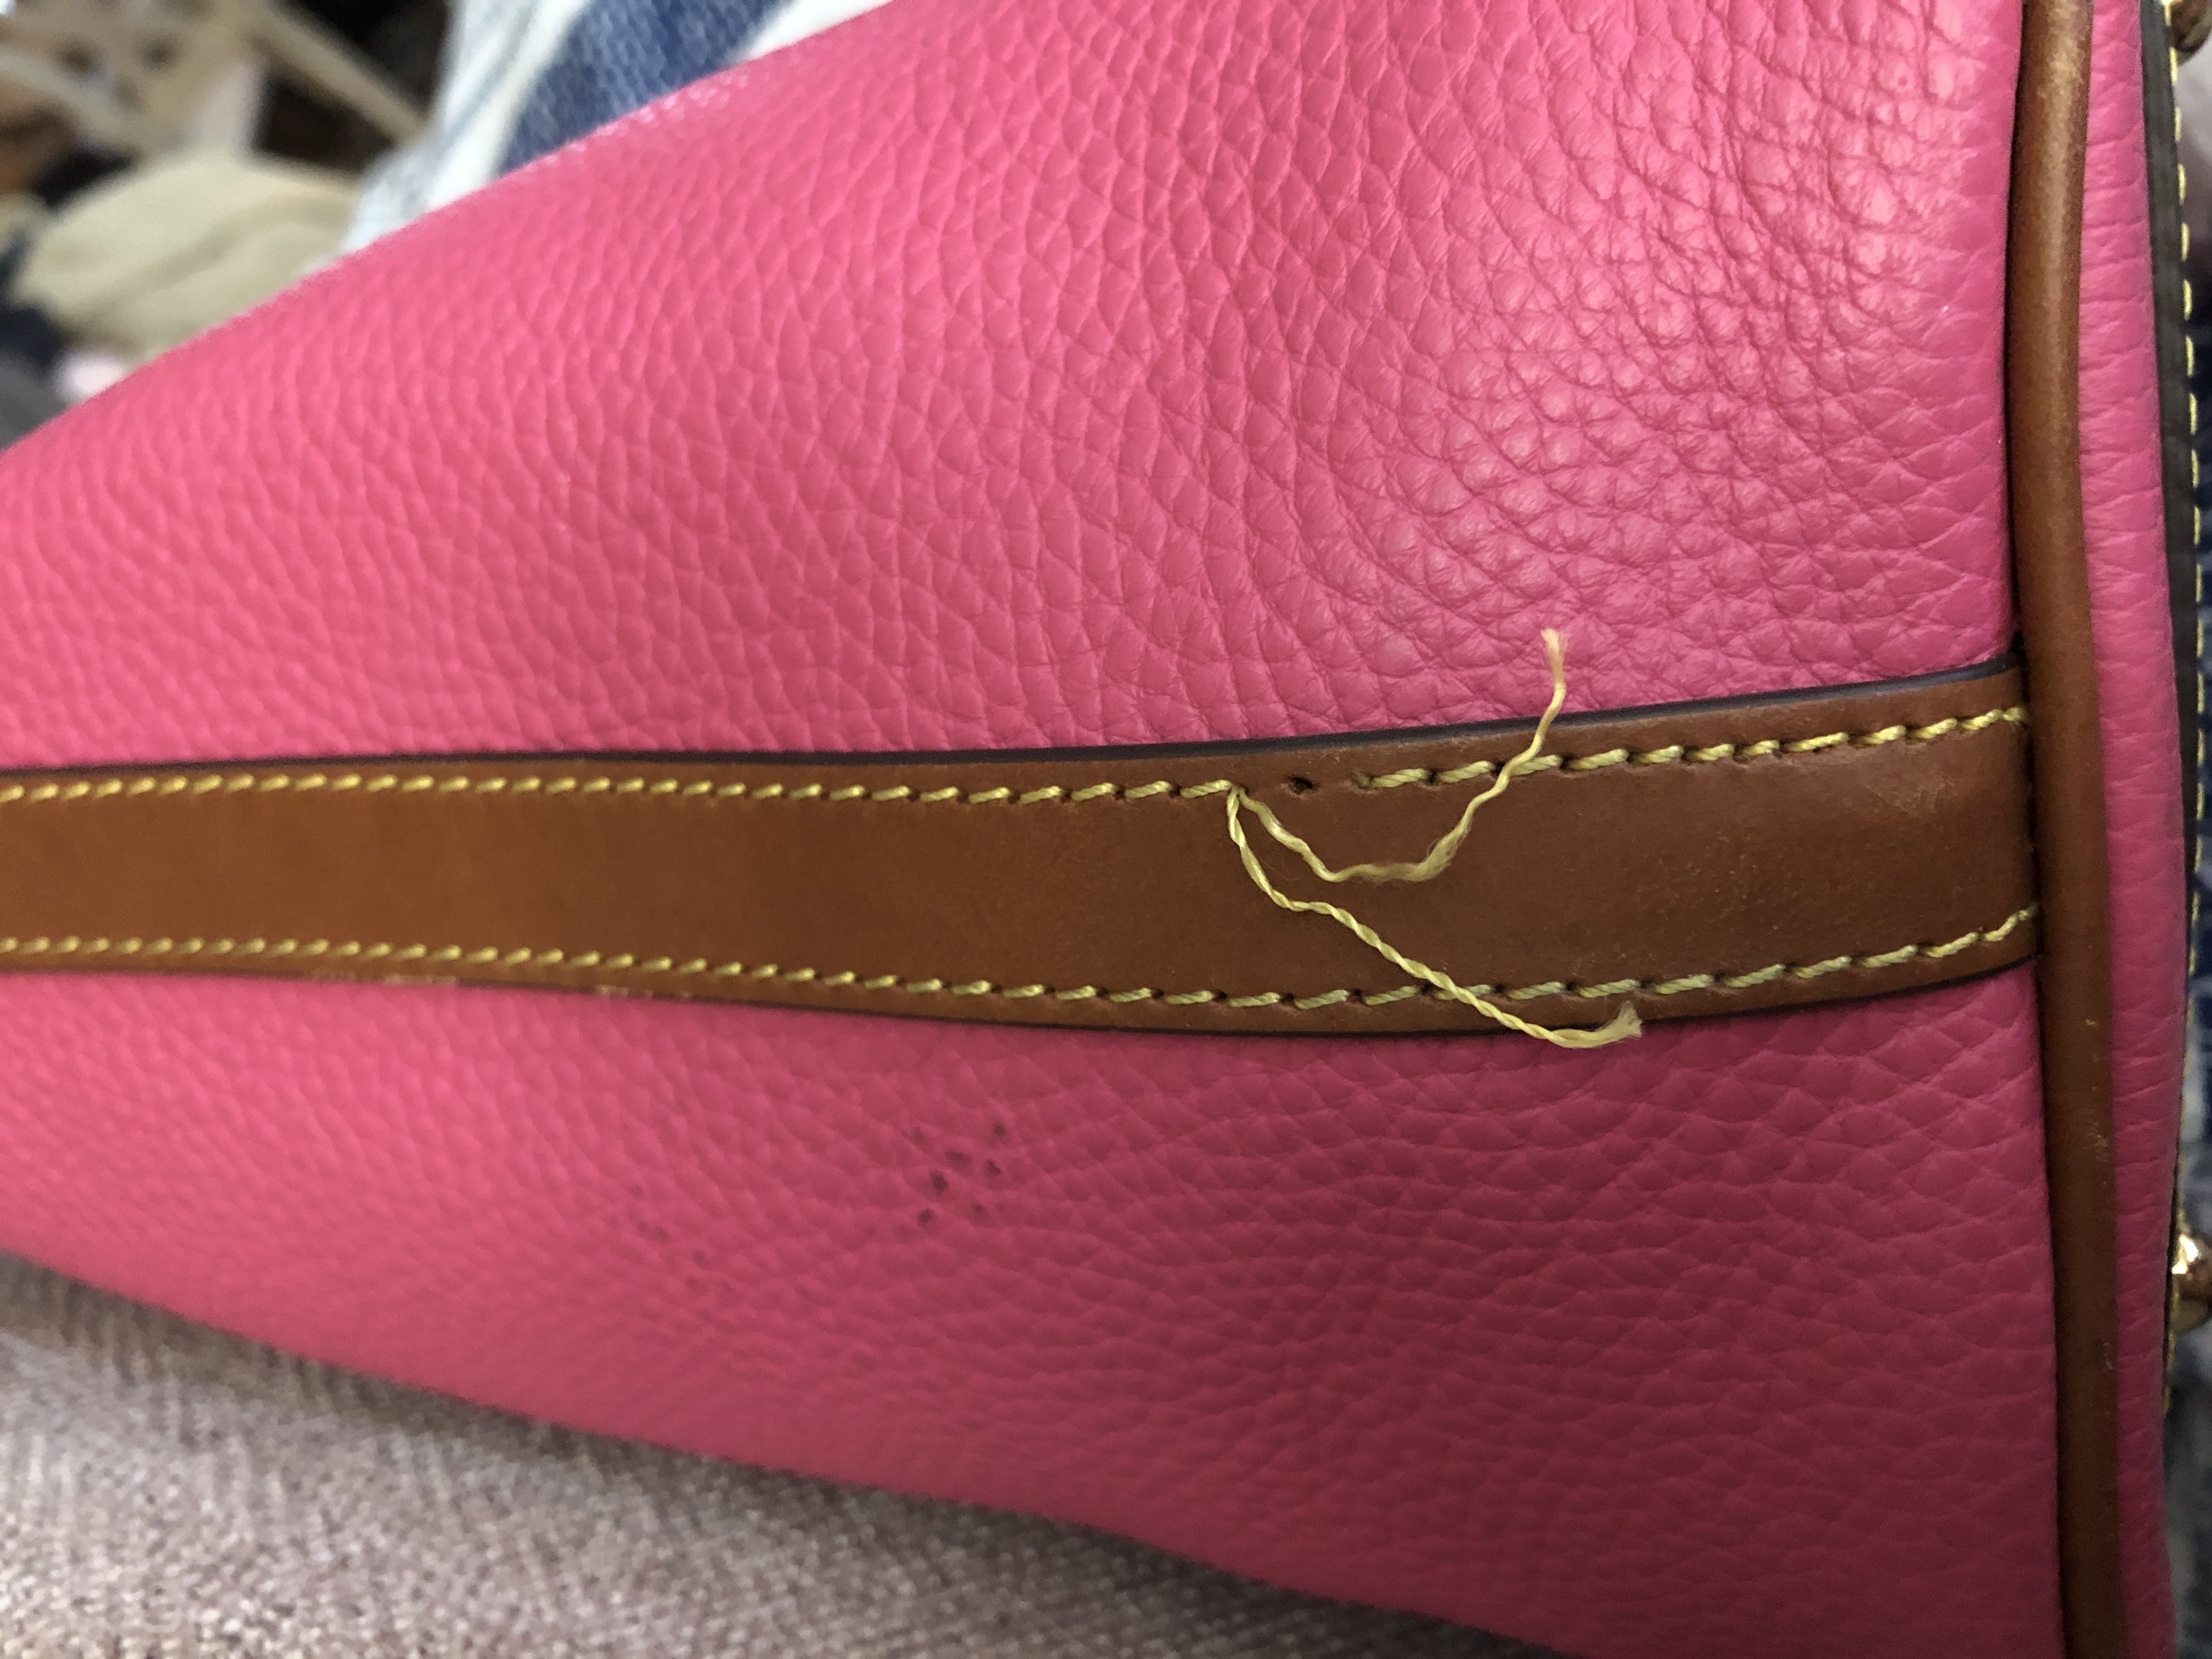 Win a Dooney & Bourke Saffiano Hadley Tote! US ends 11/21 - Mom Does Reviews